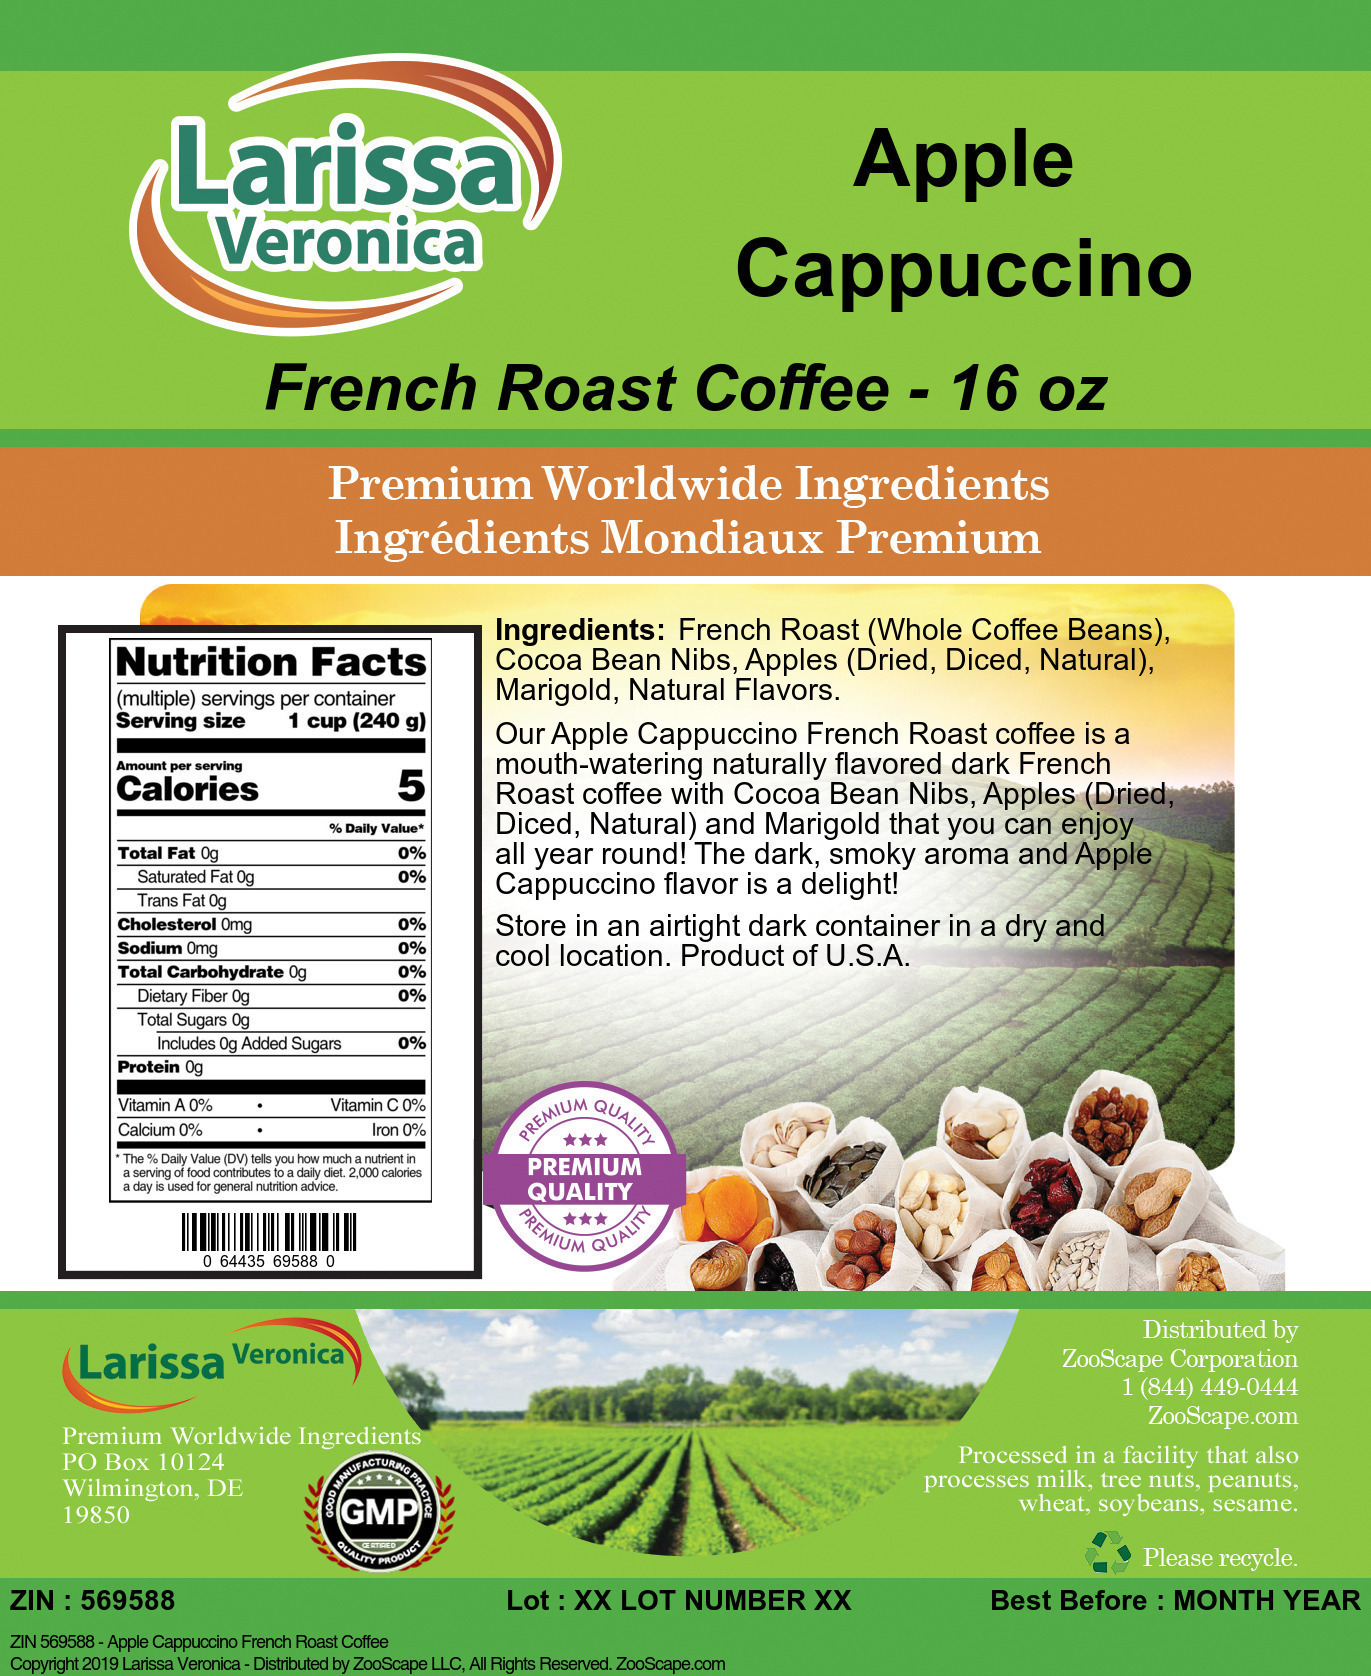 Apple Cappuccino French Roast Coffee - Label